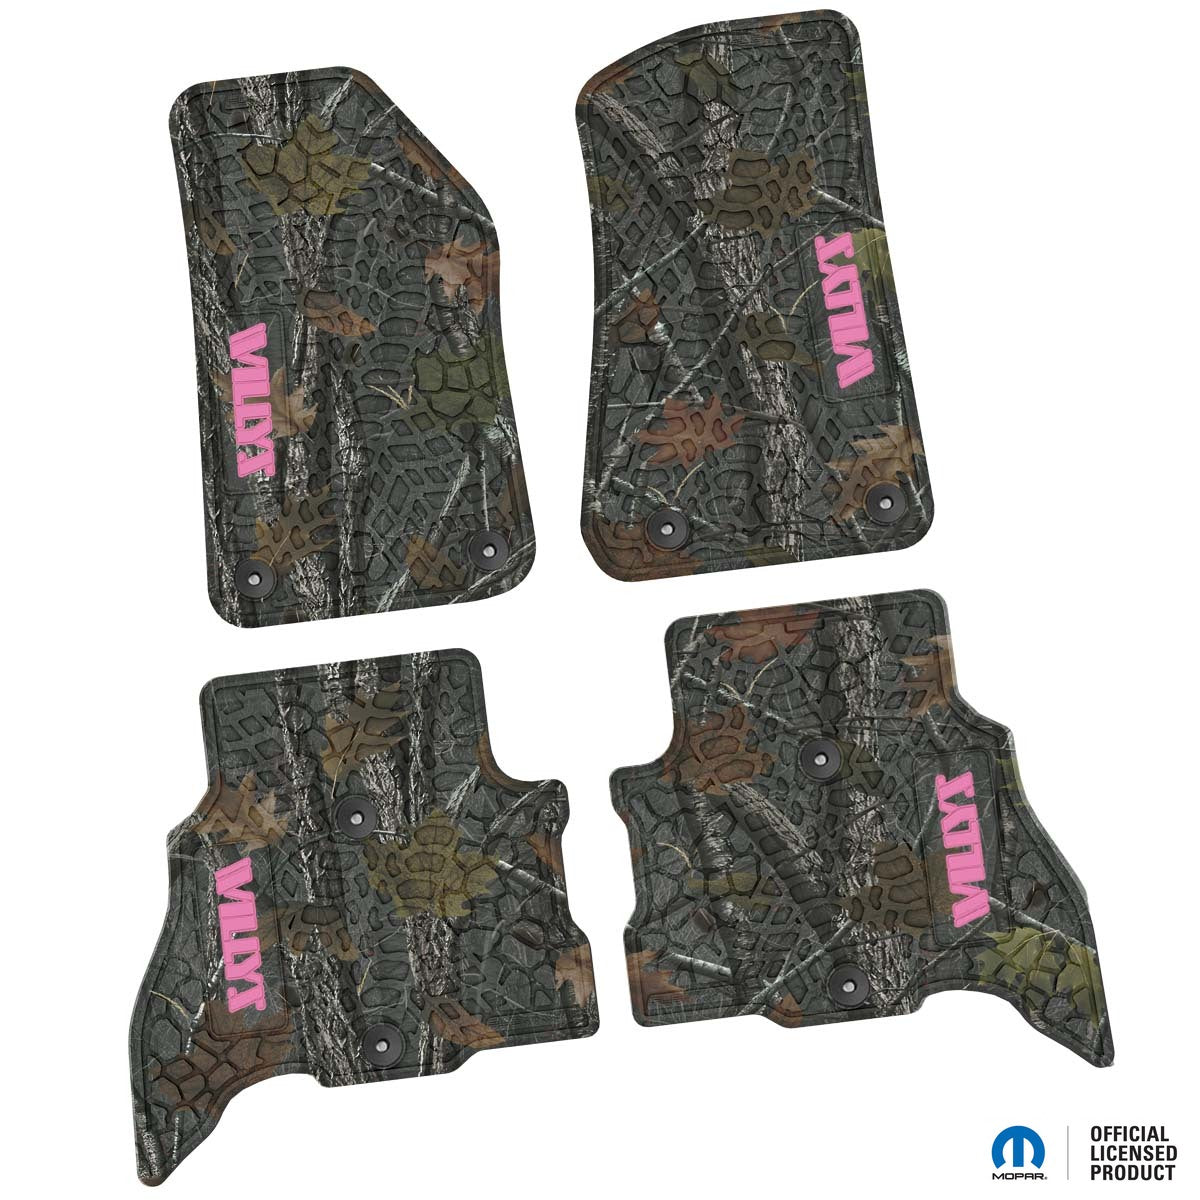 Jeep Floor Mats 21-23 Jeep 4XE 4 Piece Tire Tread/Scorched Earth Scene w/ Willys Insert - Rugged Woods w/ Pink insert FlexTread